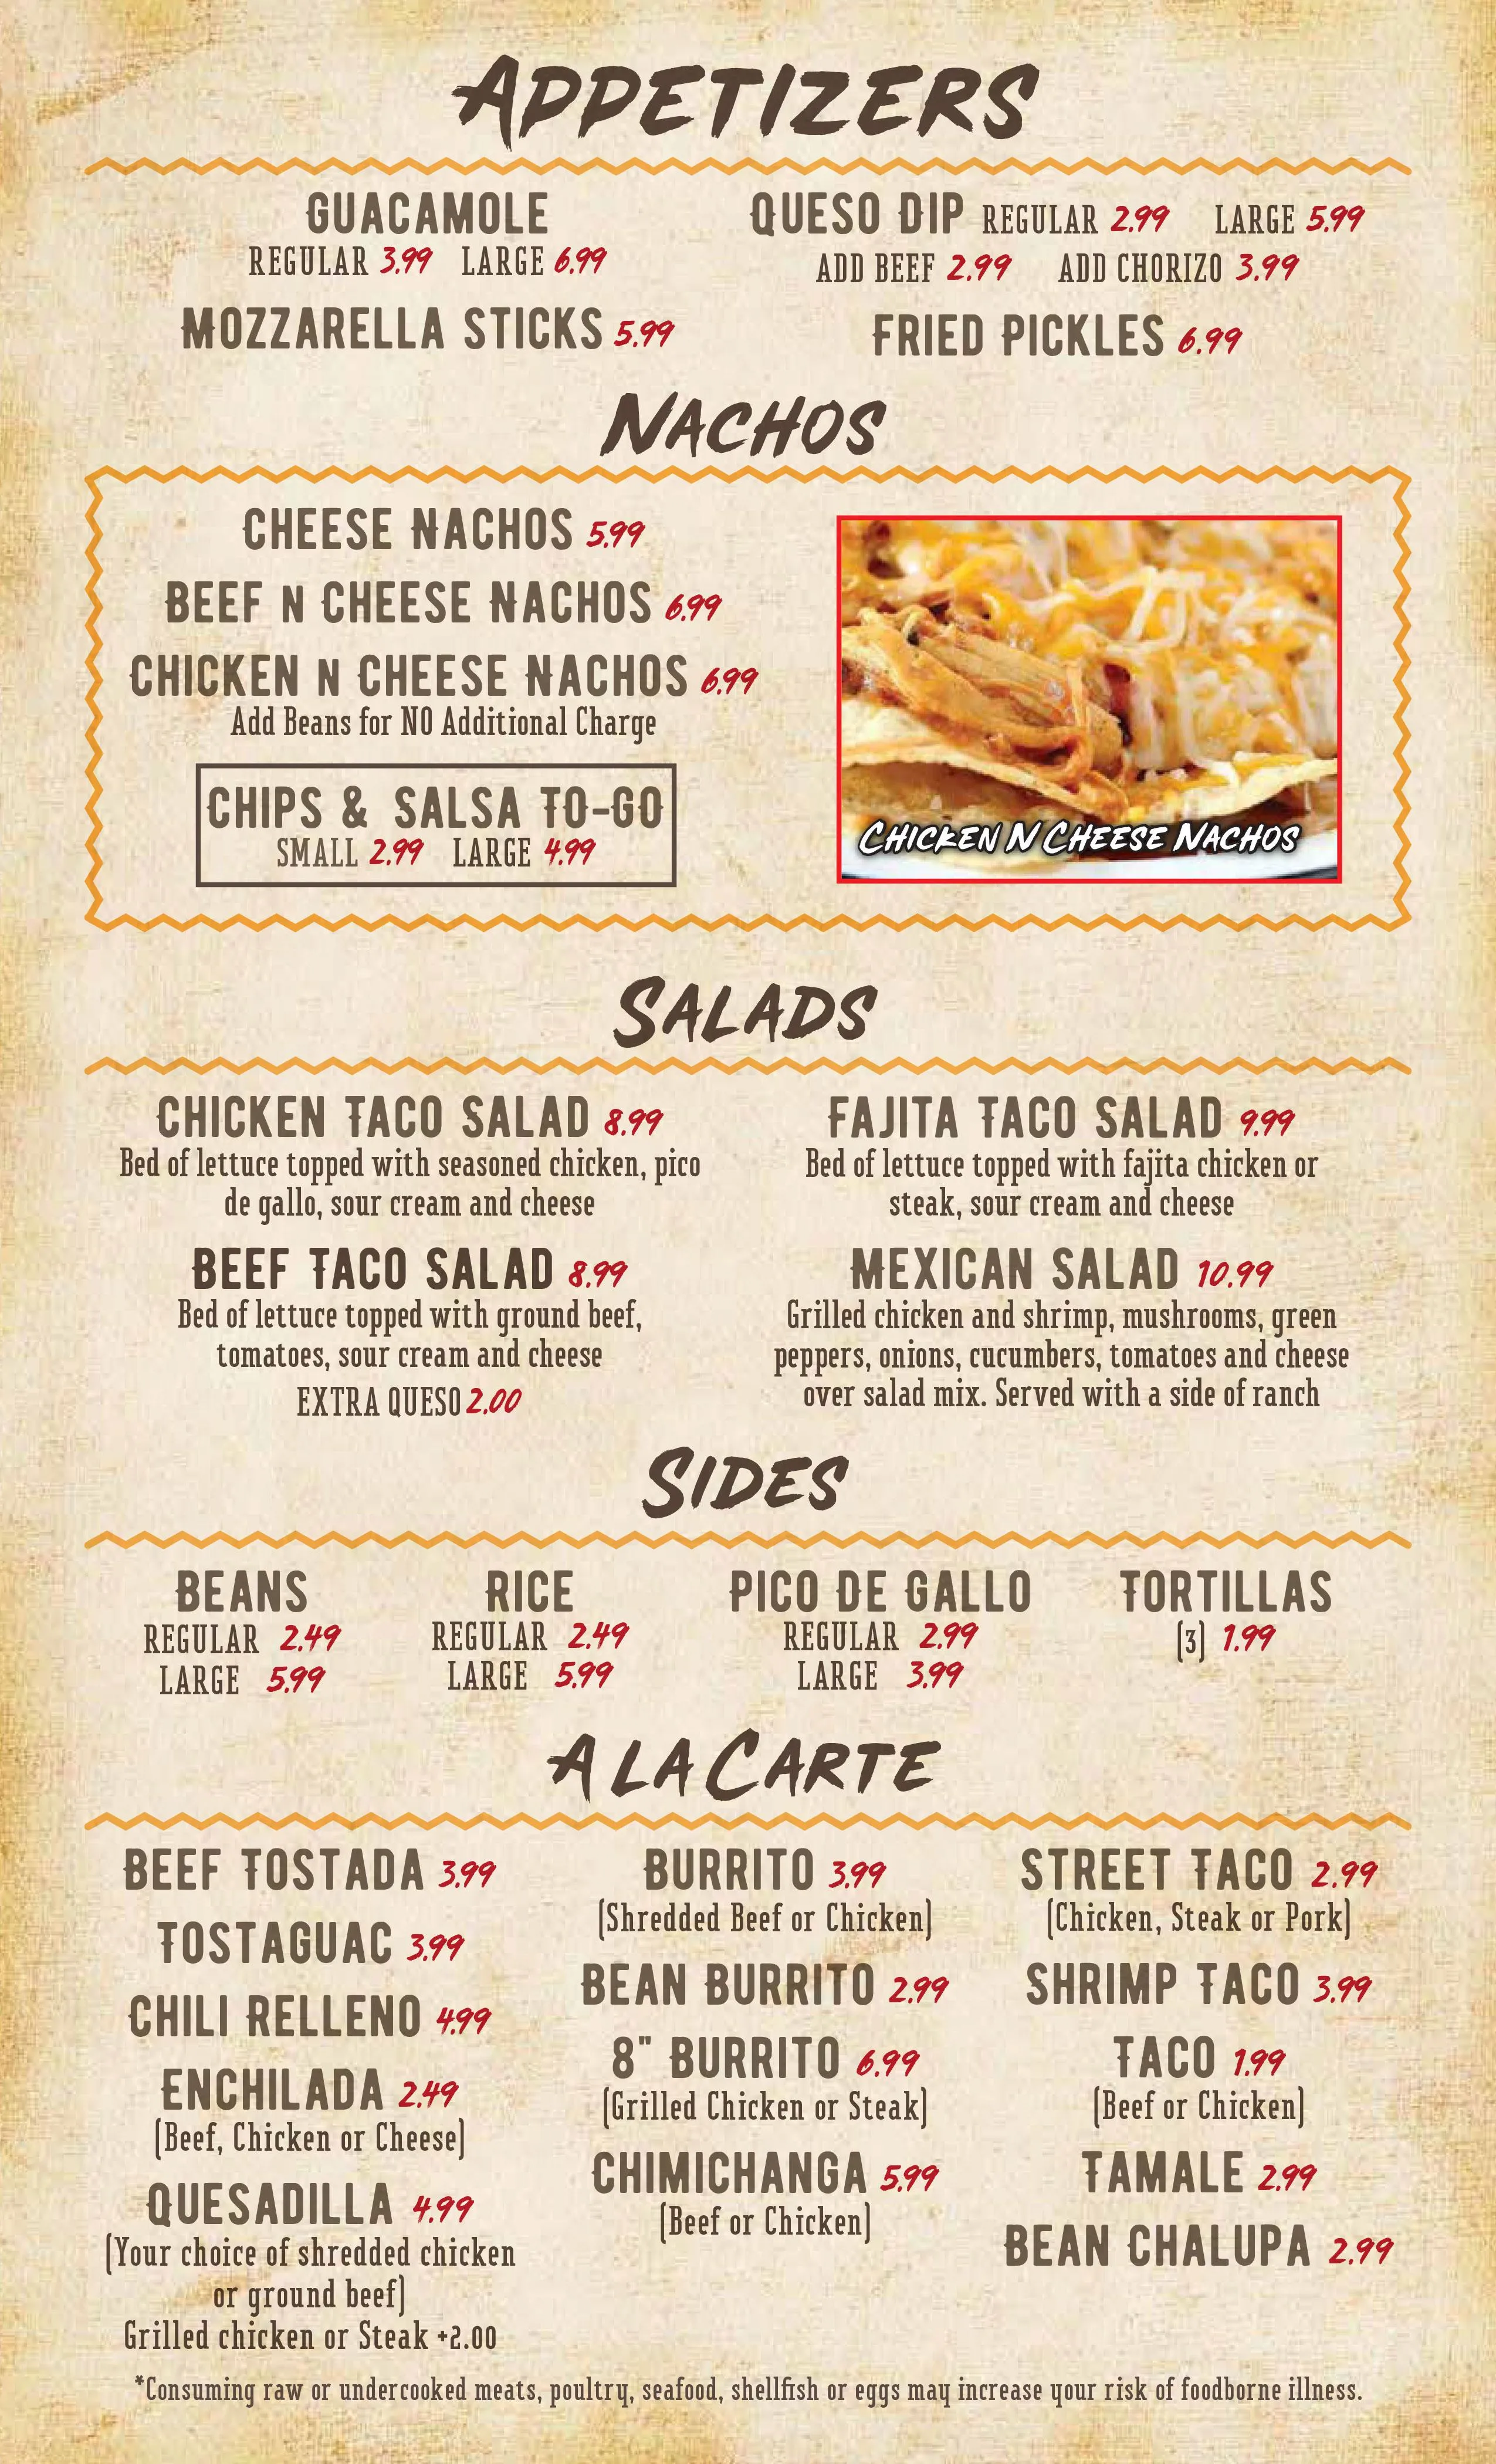 The Rodeo in Okmulgee menu page with appetizers, nachos, salads, sides, and a la carte options.